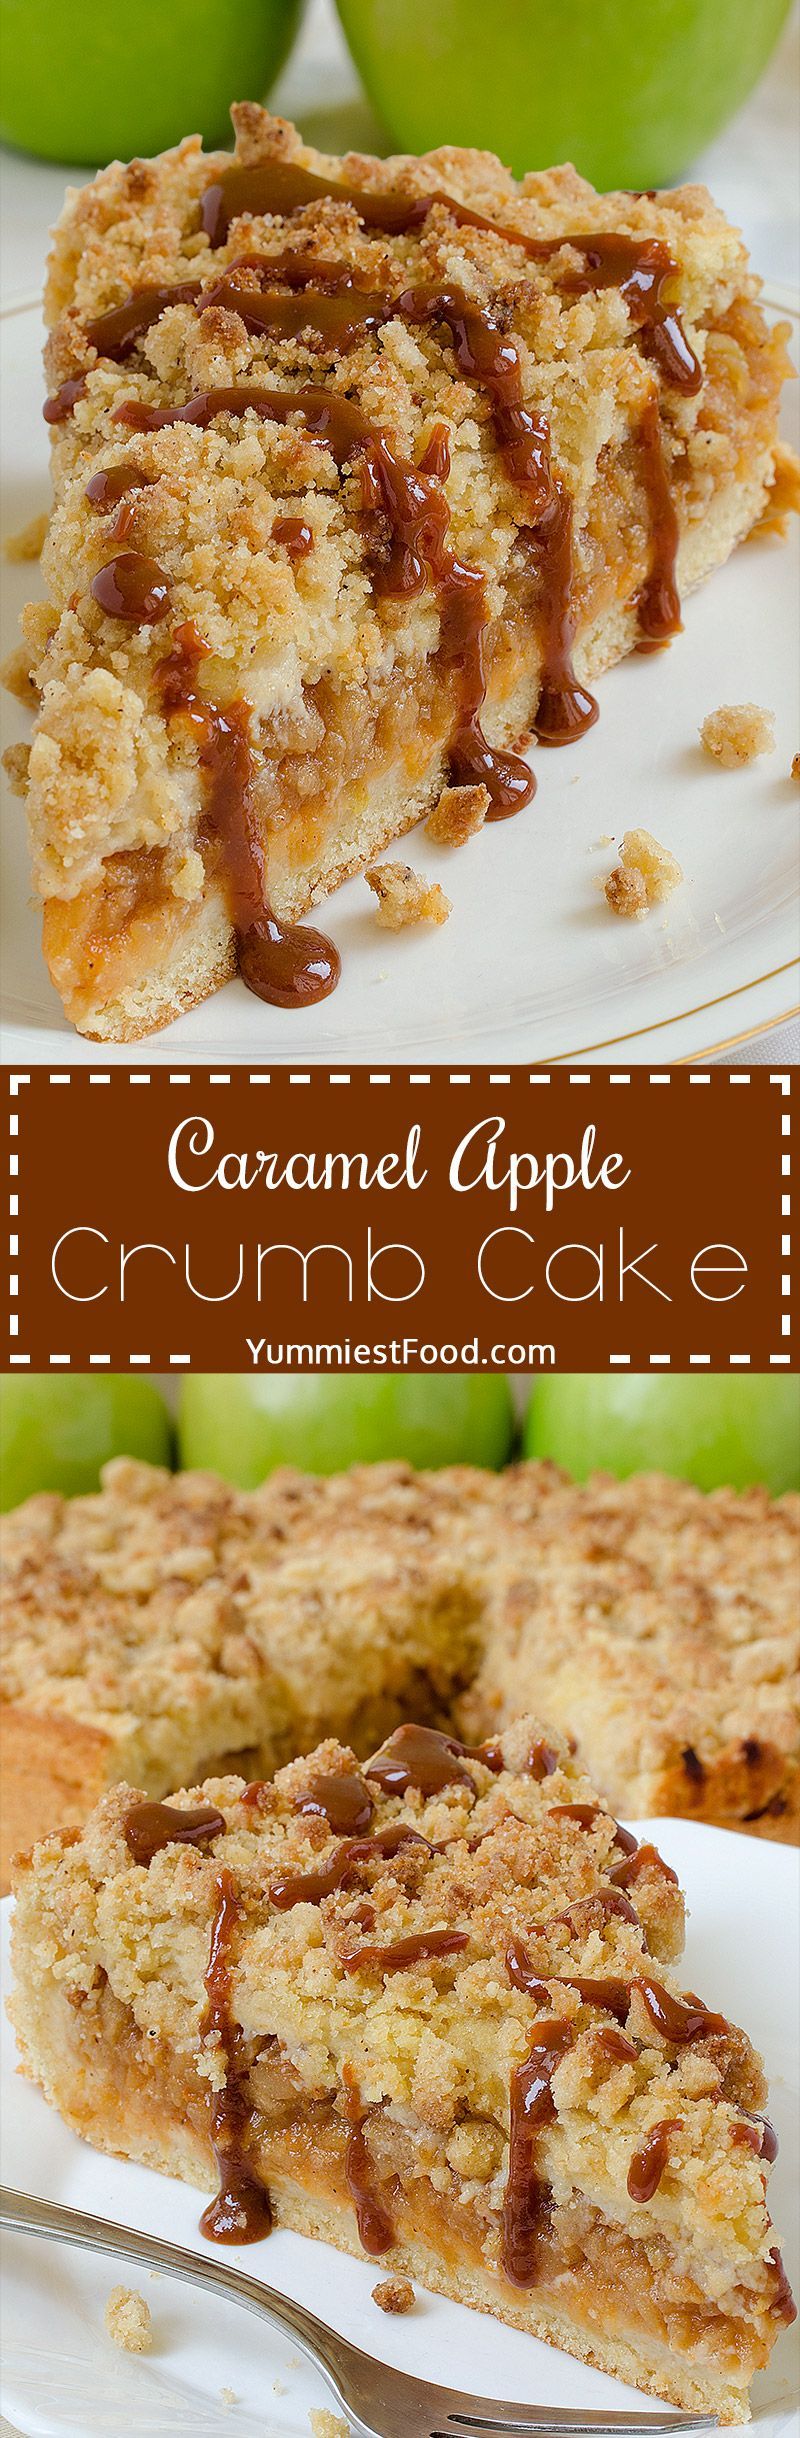 Caramel Apple Crumb Cake – This recipe is perfectly delicious! This Apple Cake with crumb mixture over